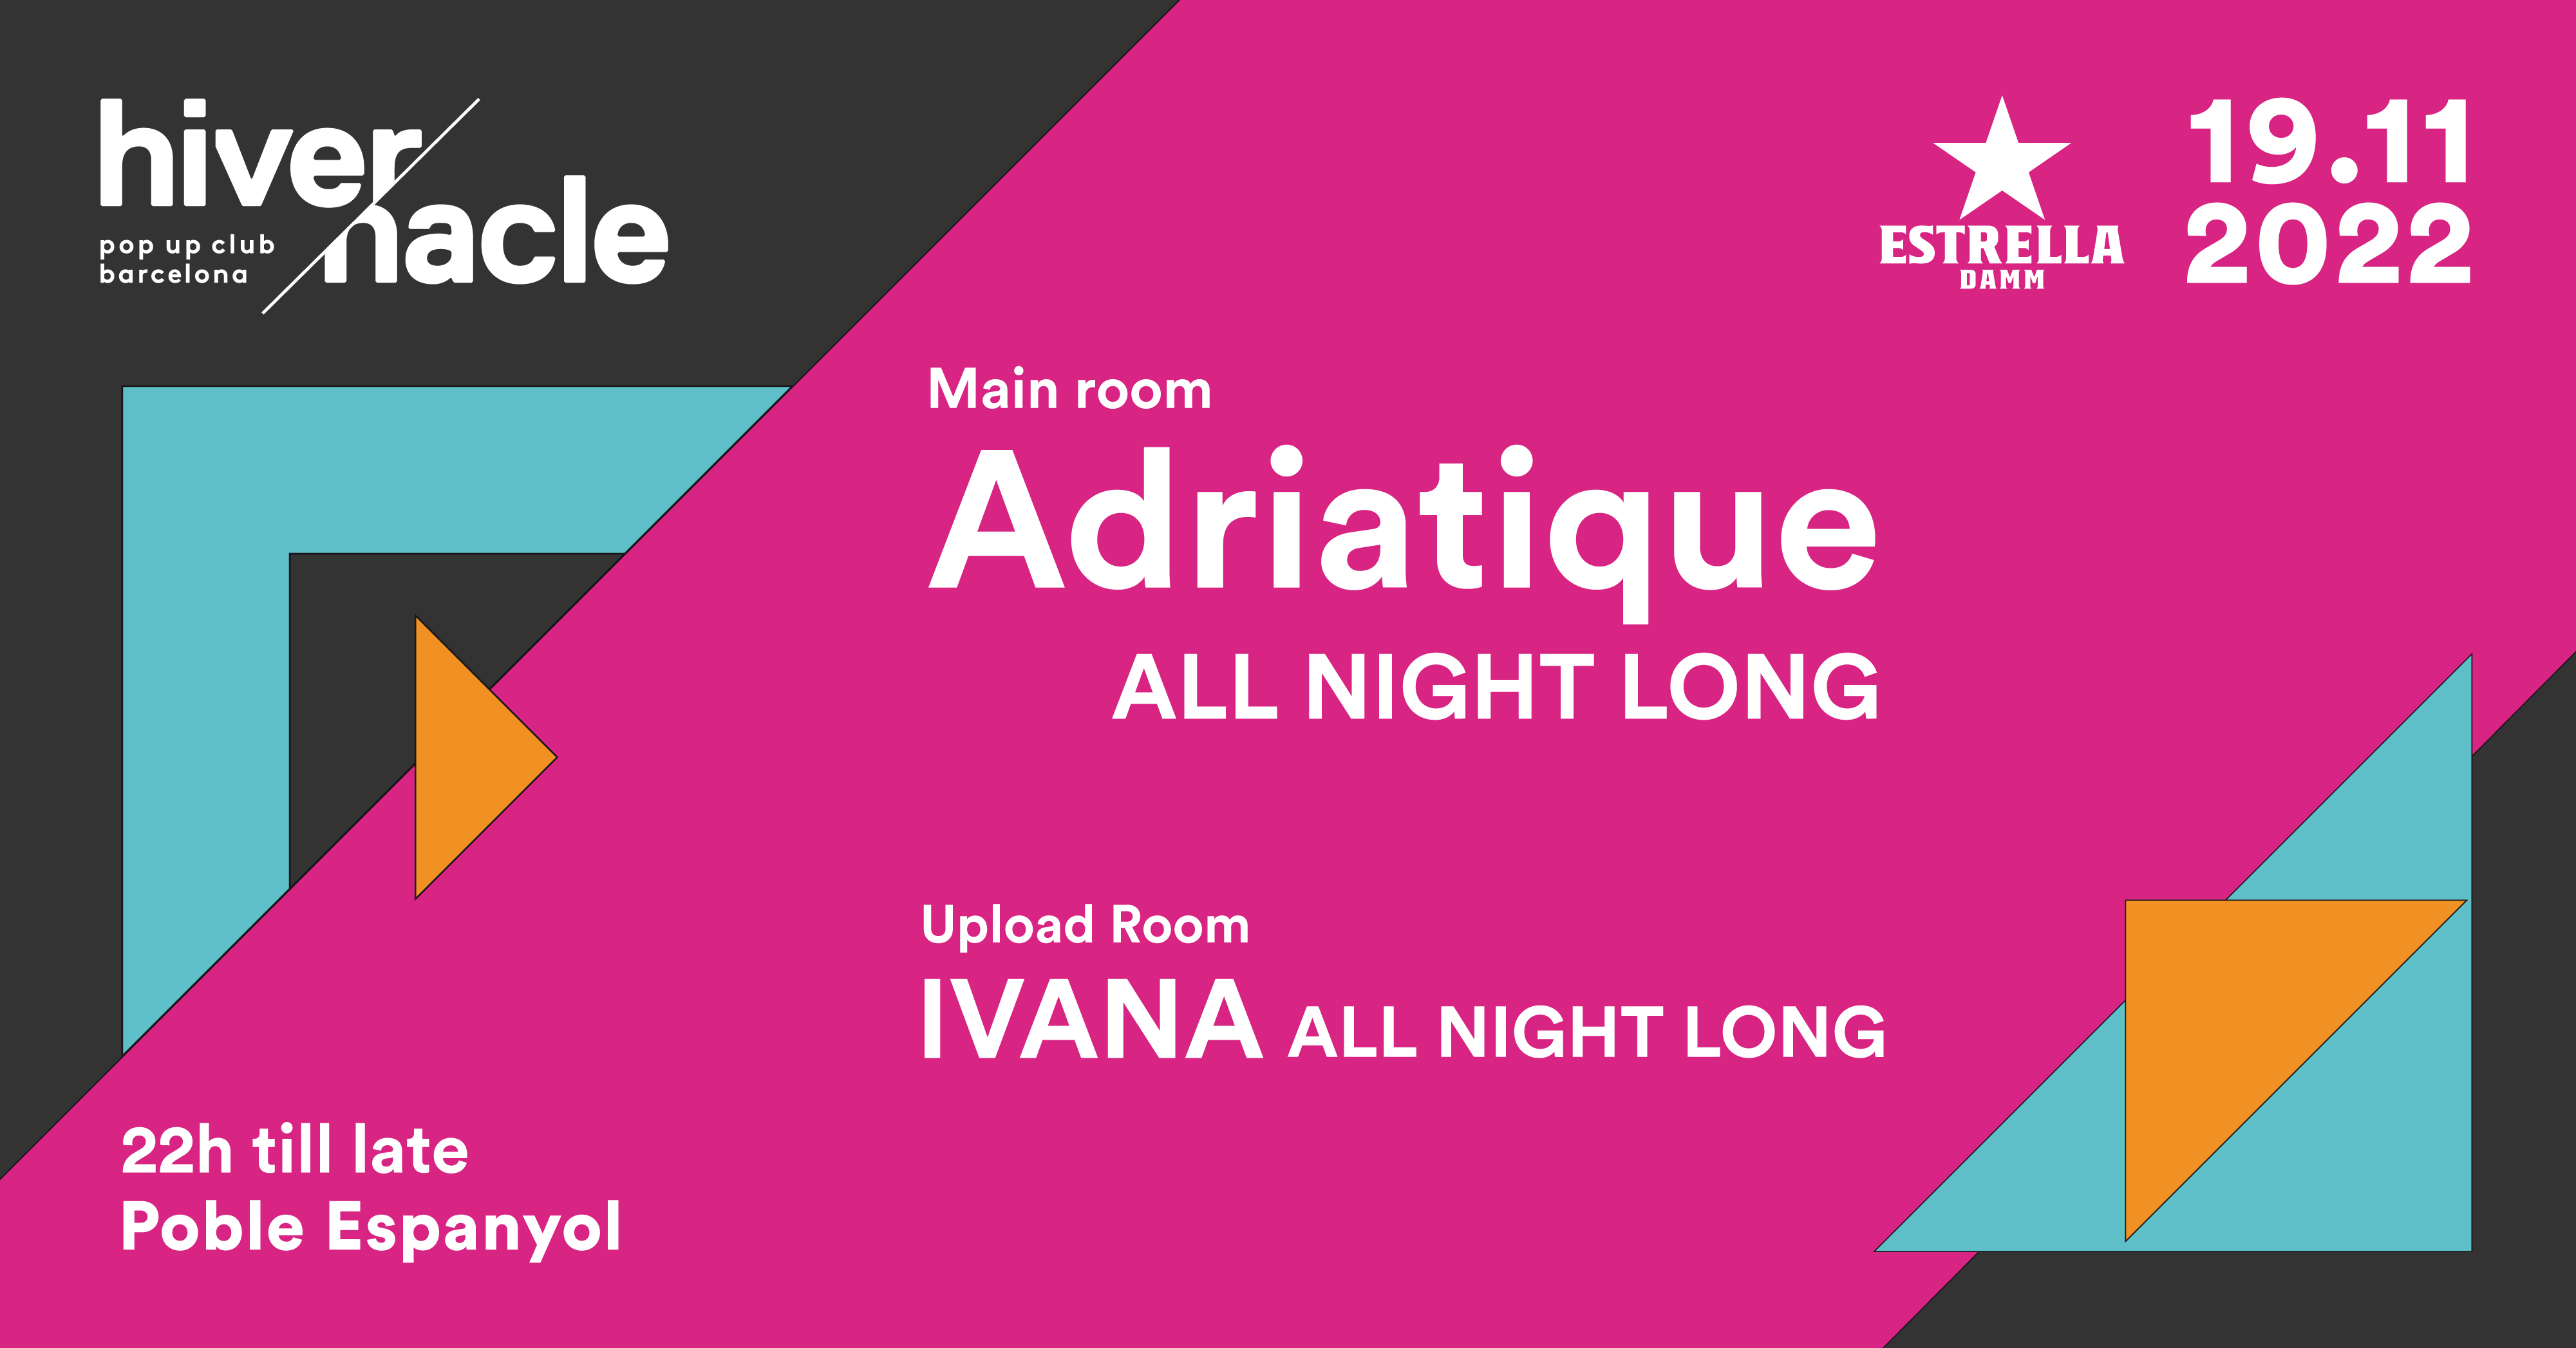 Hivernacle Pop Up Club #3: Adriatique ALL NIGHT LONG, Ivana ALL NIGHT LONG - Flyer back